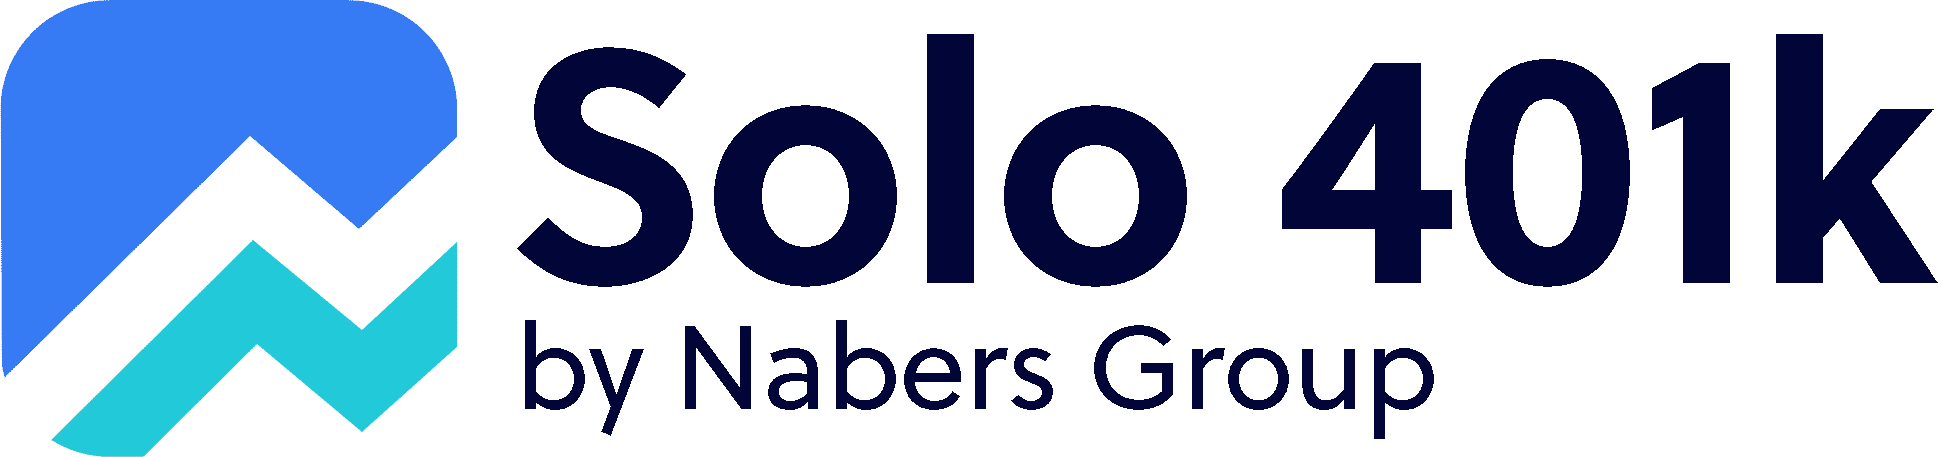 Solo 401k by Nabers Group Comparison